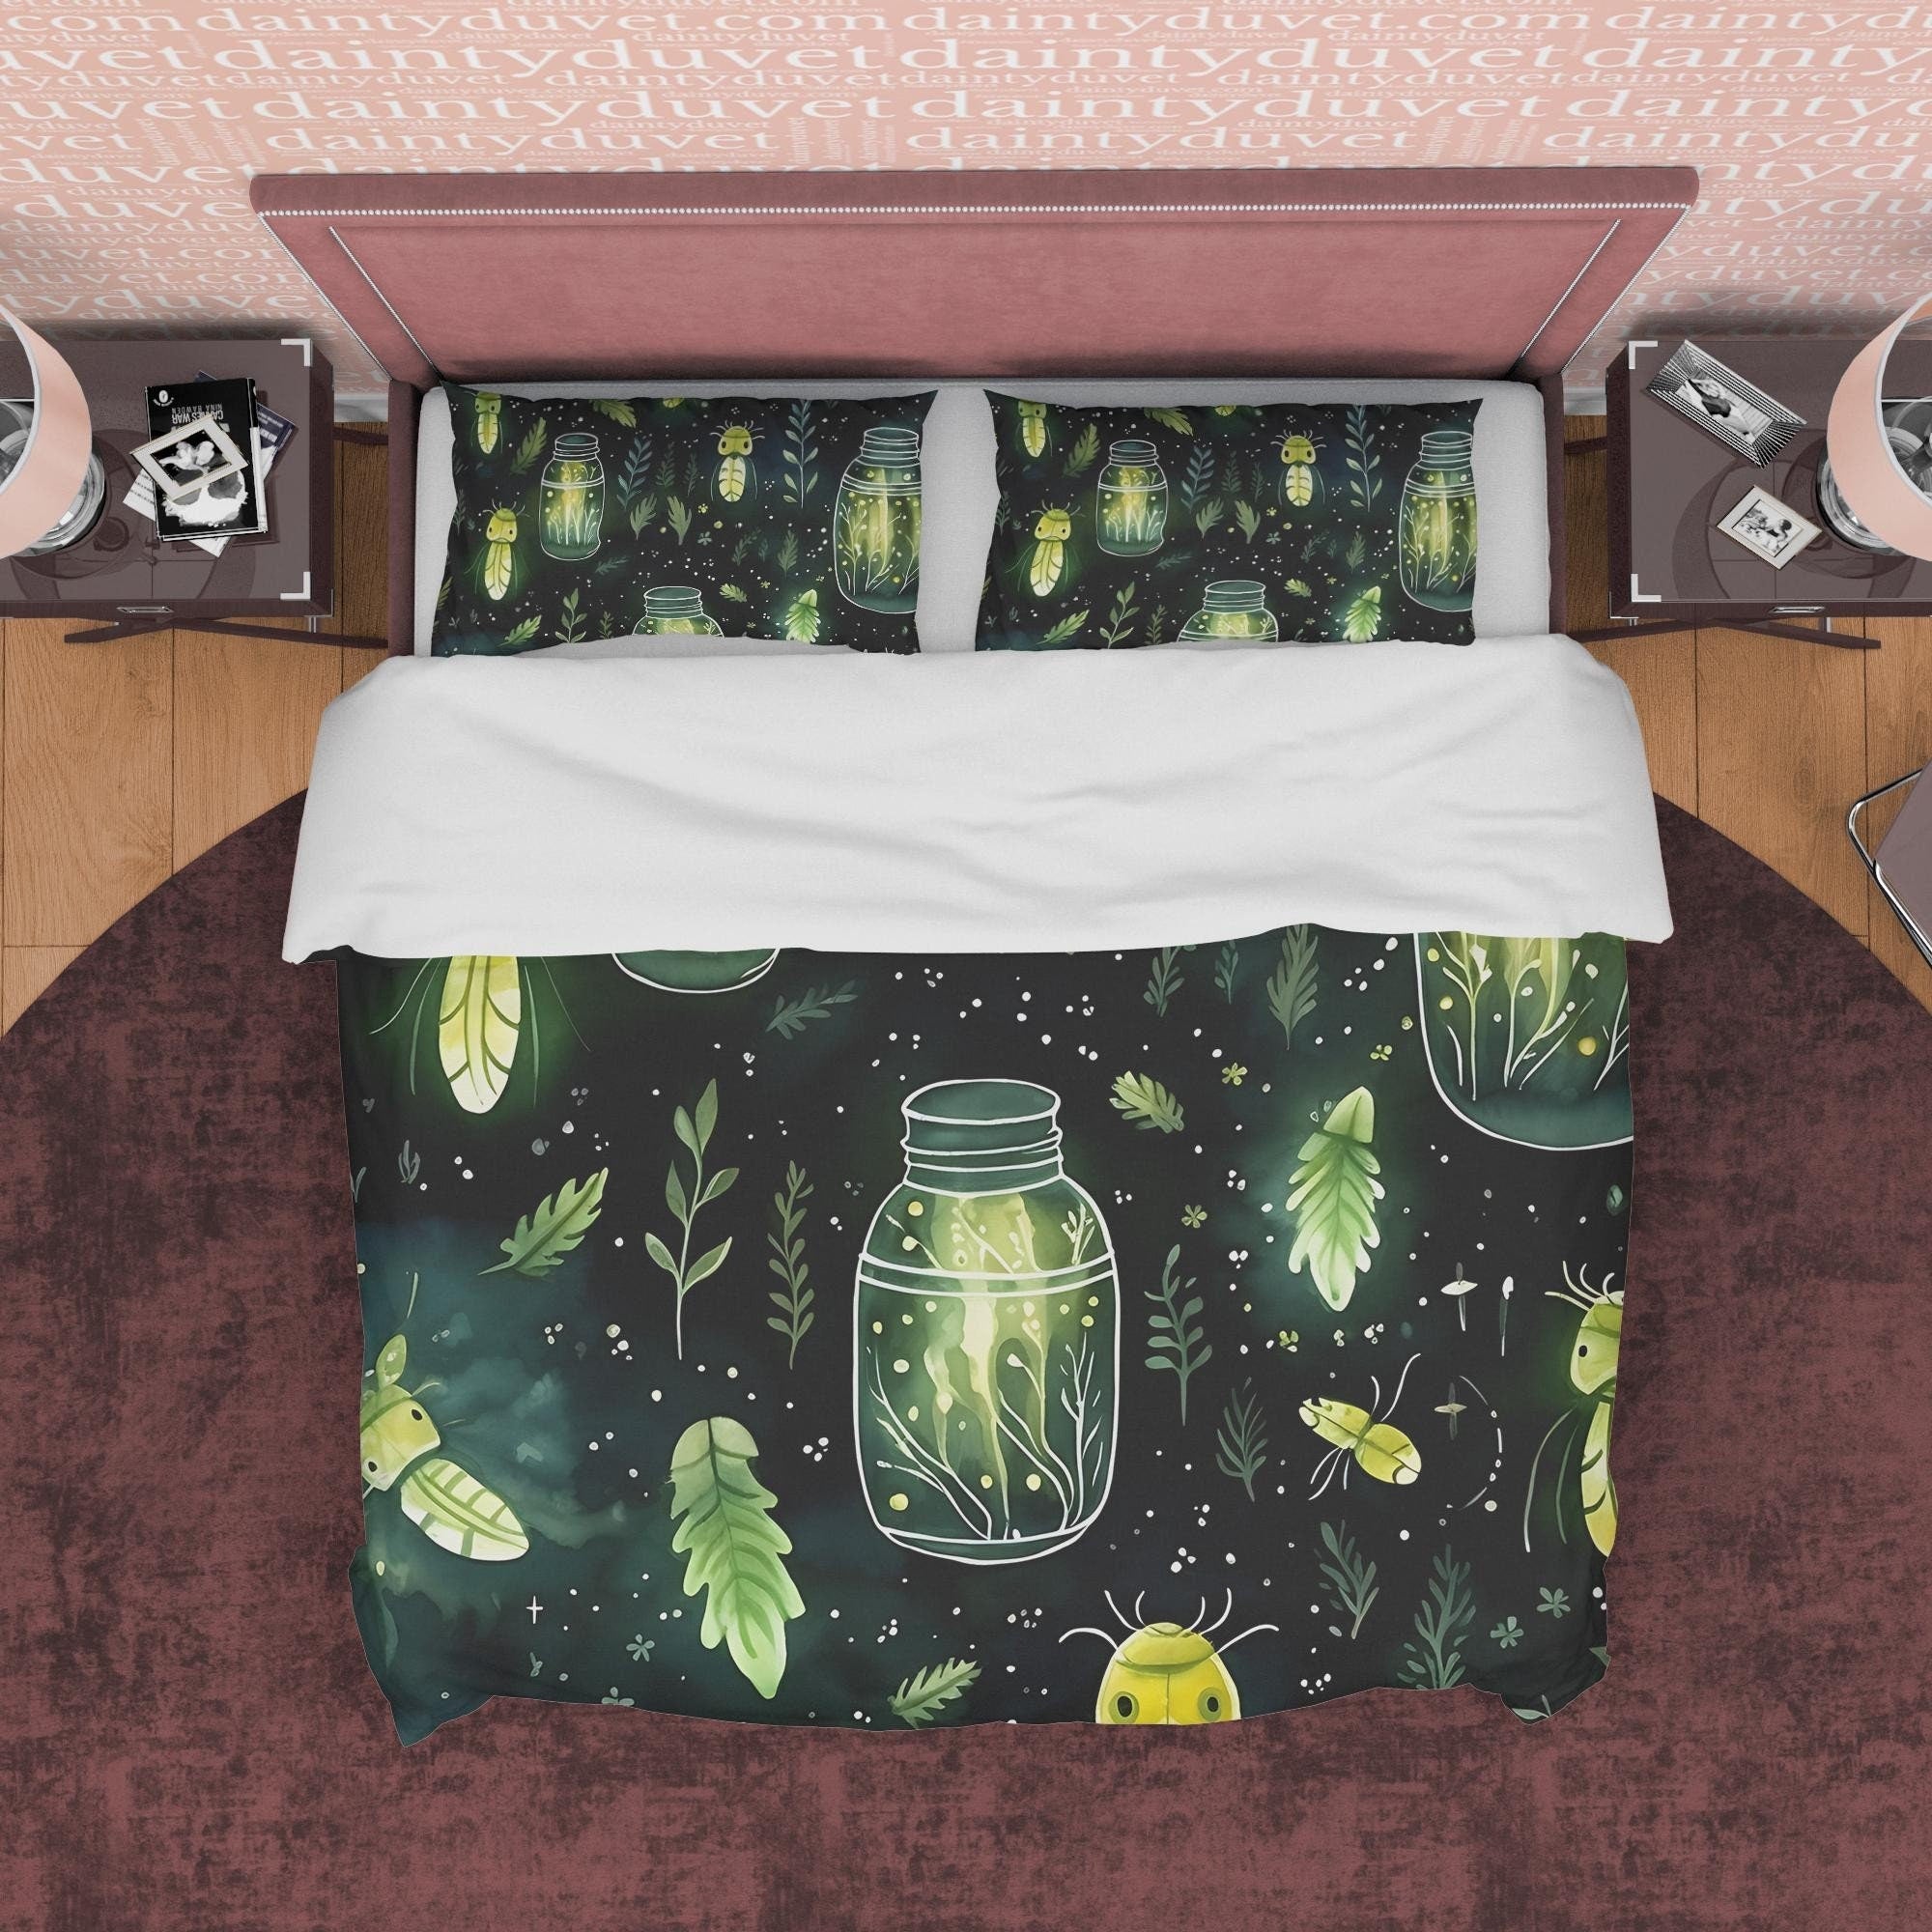 Enchanted Insect Jar Duvet Cover Set, Green Mythical Aesthetic Zipper Bedding, Halloween Room Decor, Glowing Leaf Unique Blanket Cover